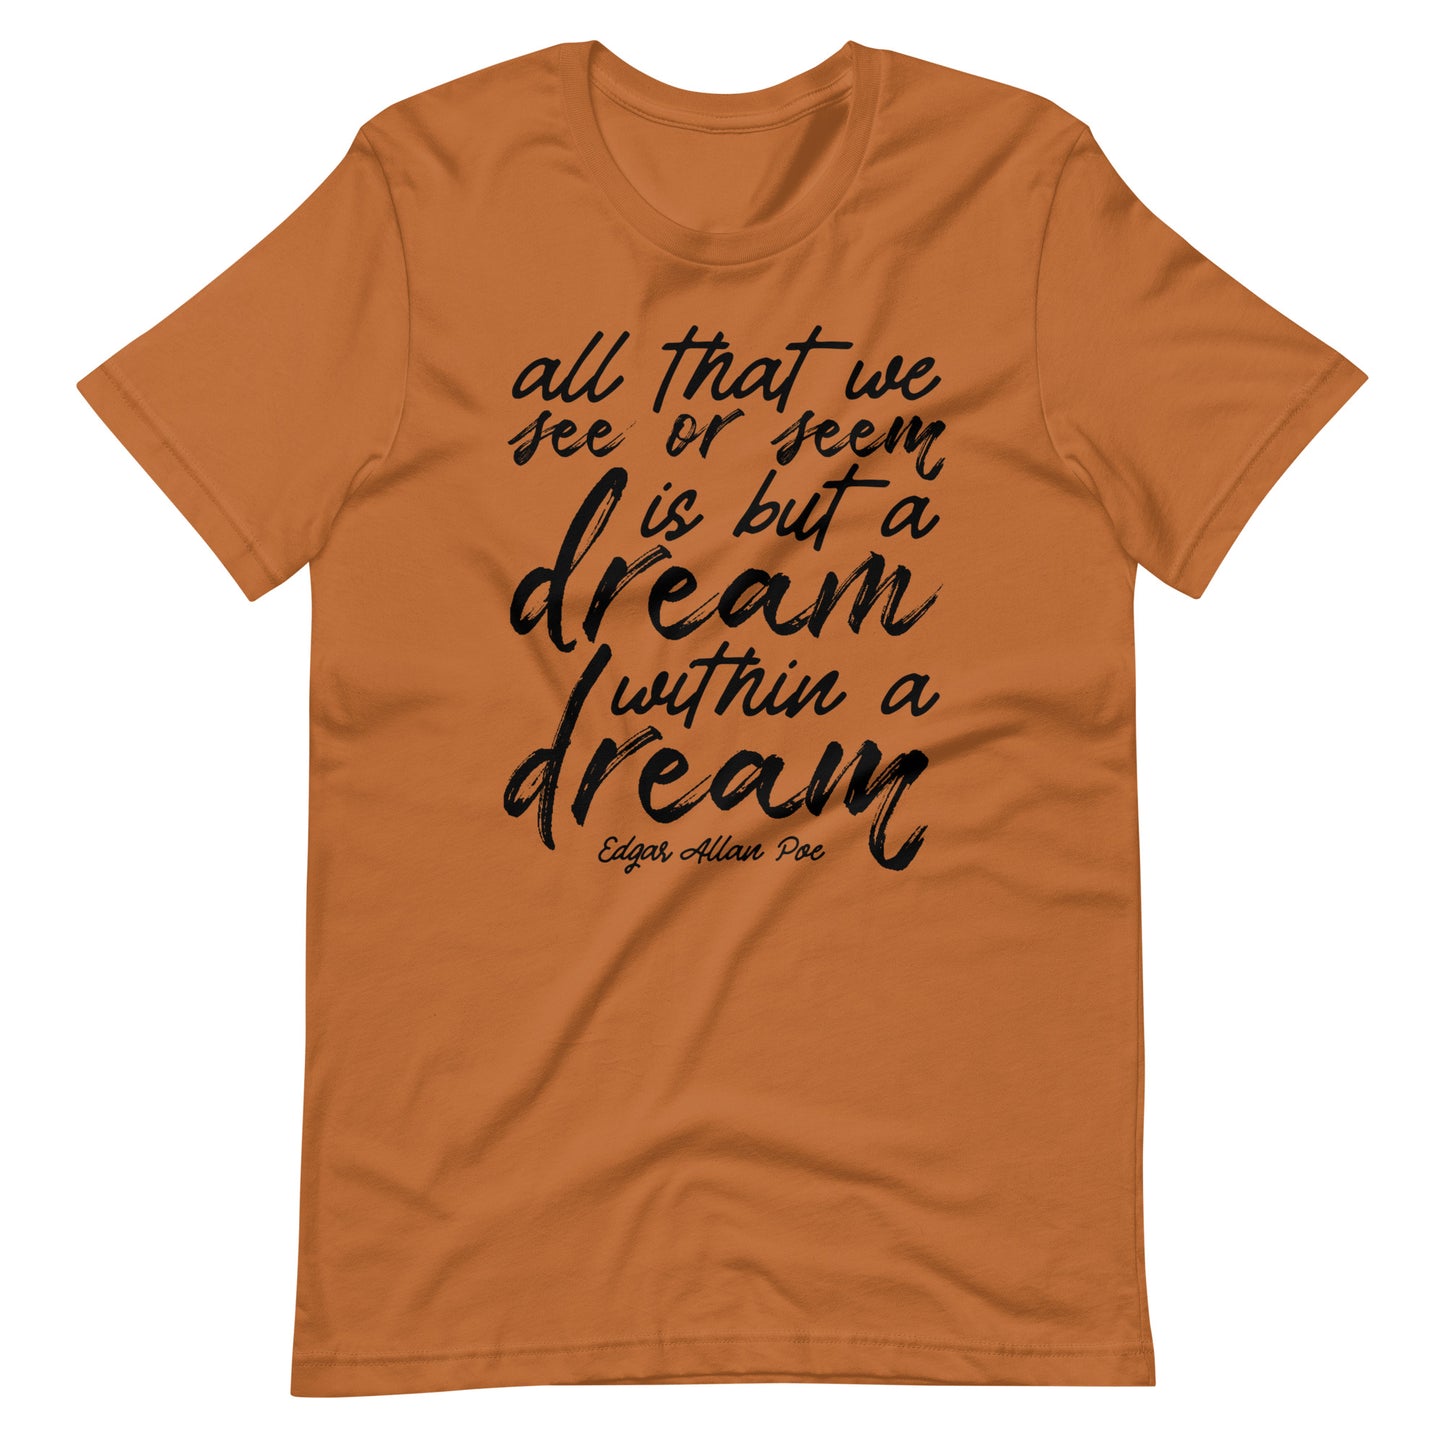 Dream Within a Dream Edgar Allan Poe Quote - Men's t-shirt - Toast Front